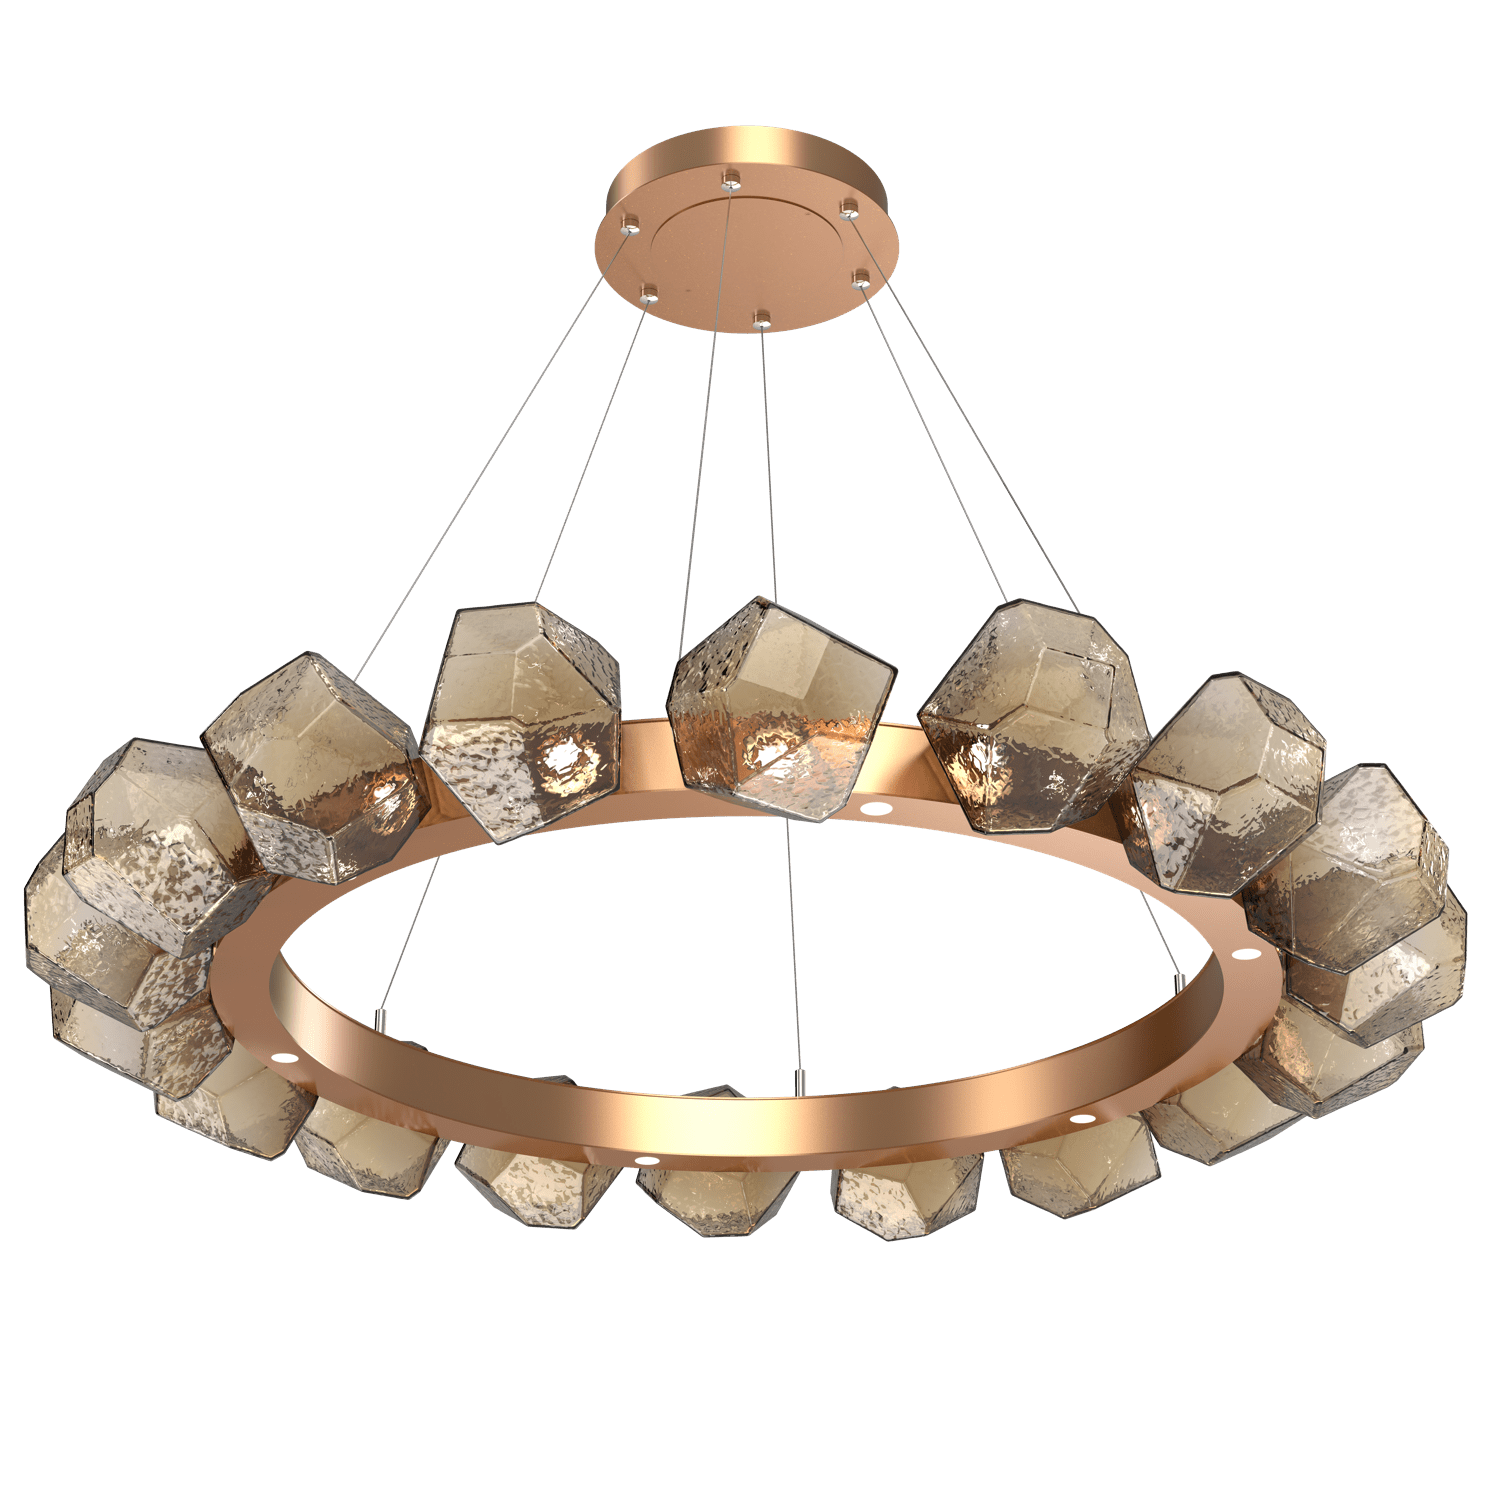 CHB0039-48-NB-B-Hammerton-Studio-Gem-48-inch-radial-ring-chandelier-with-novel-brass-finish-and-bronze-blown-glass-shades-and-LED-lamping